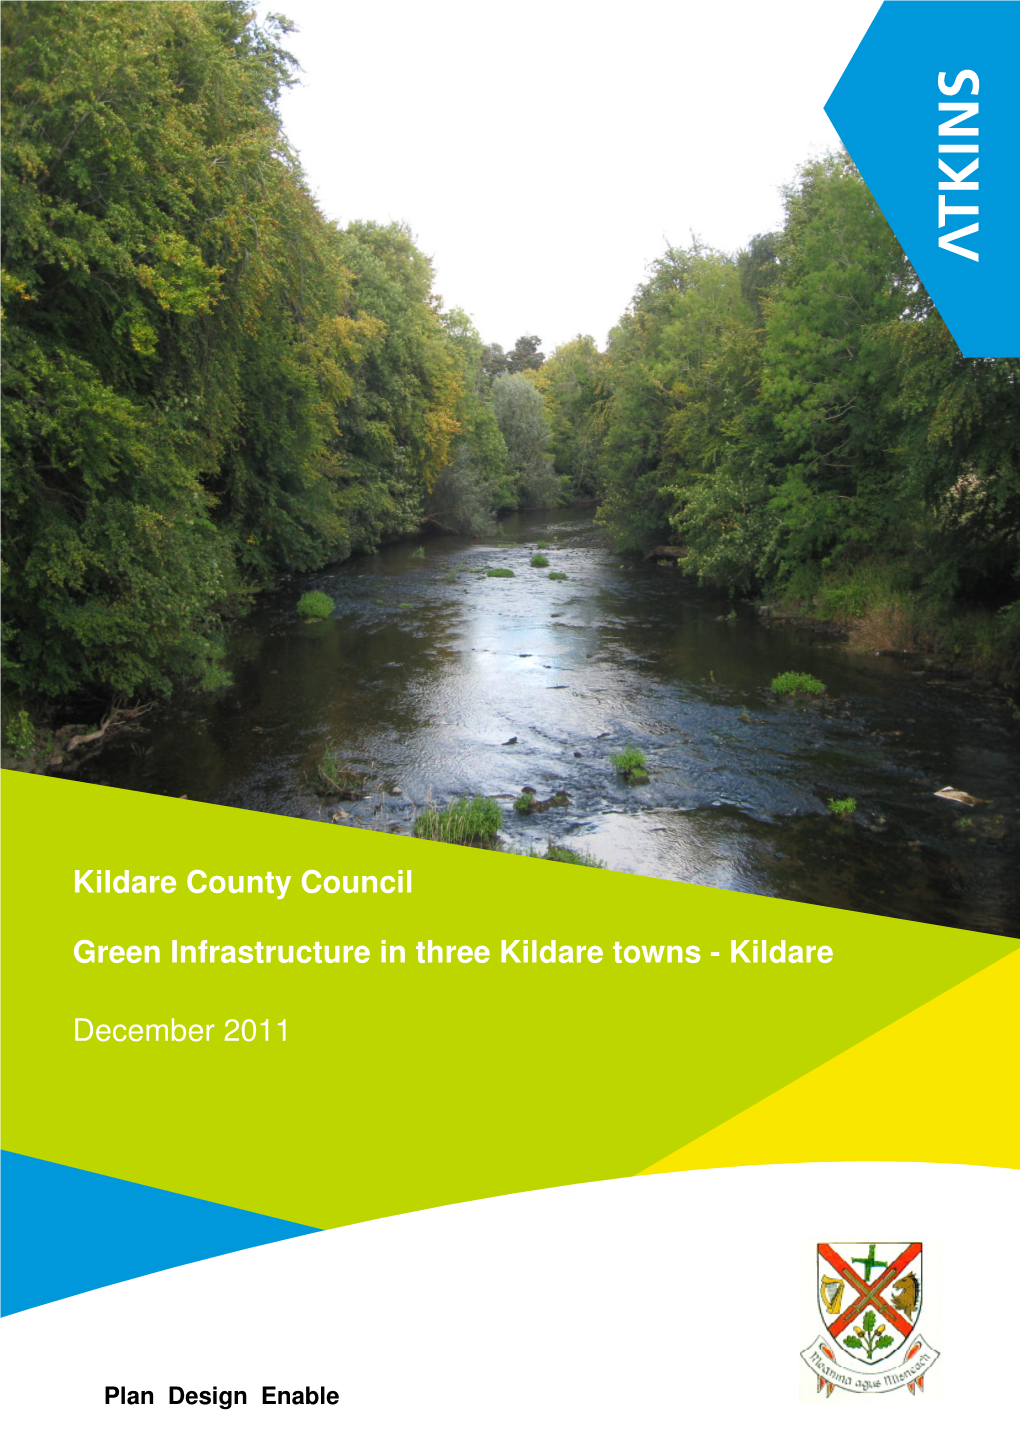 Kildare County Council Green Infrastructure in Three Kildare Towns